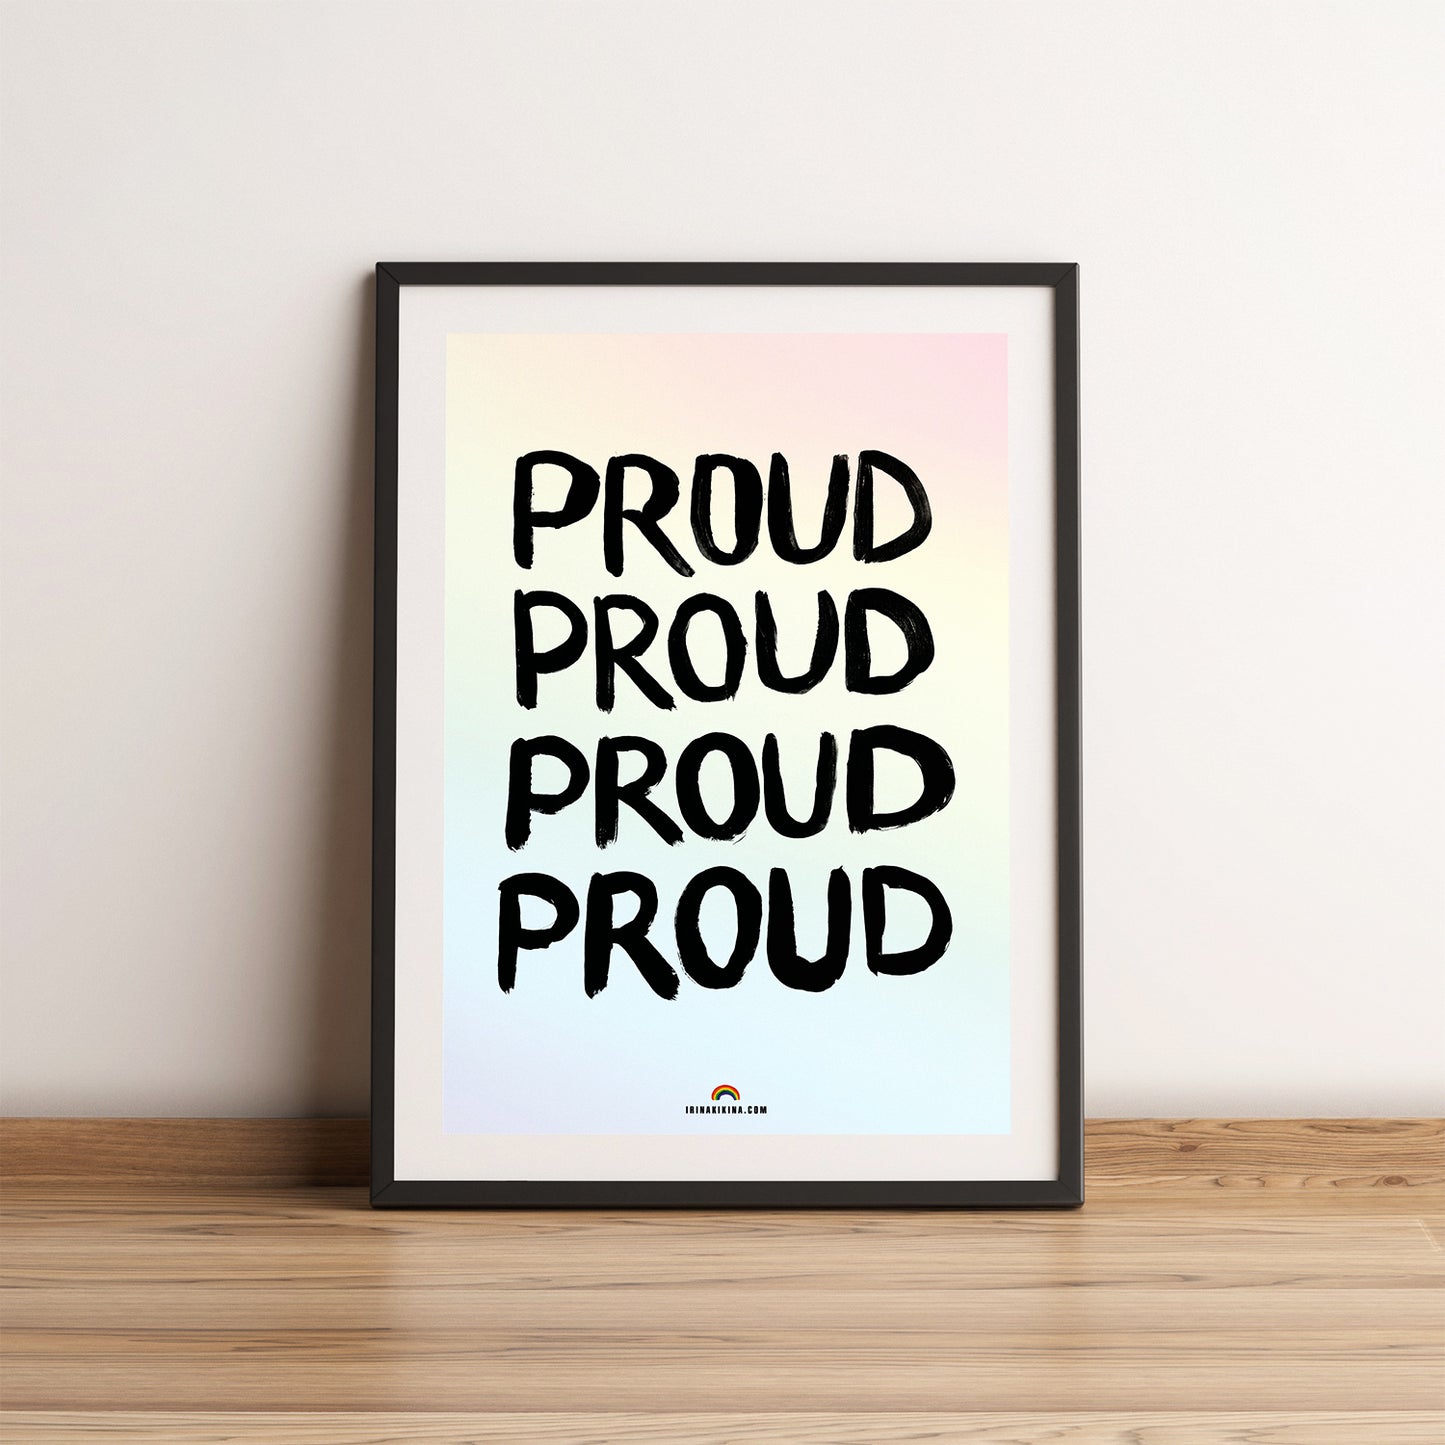 Proud Painted Artwork A4 Poster.